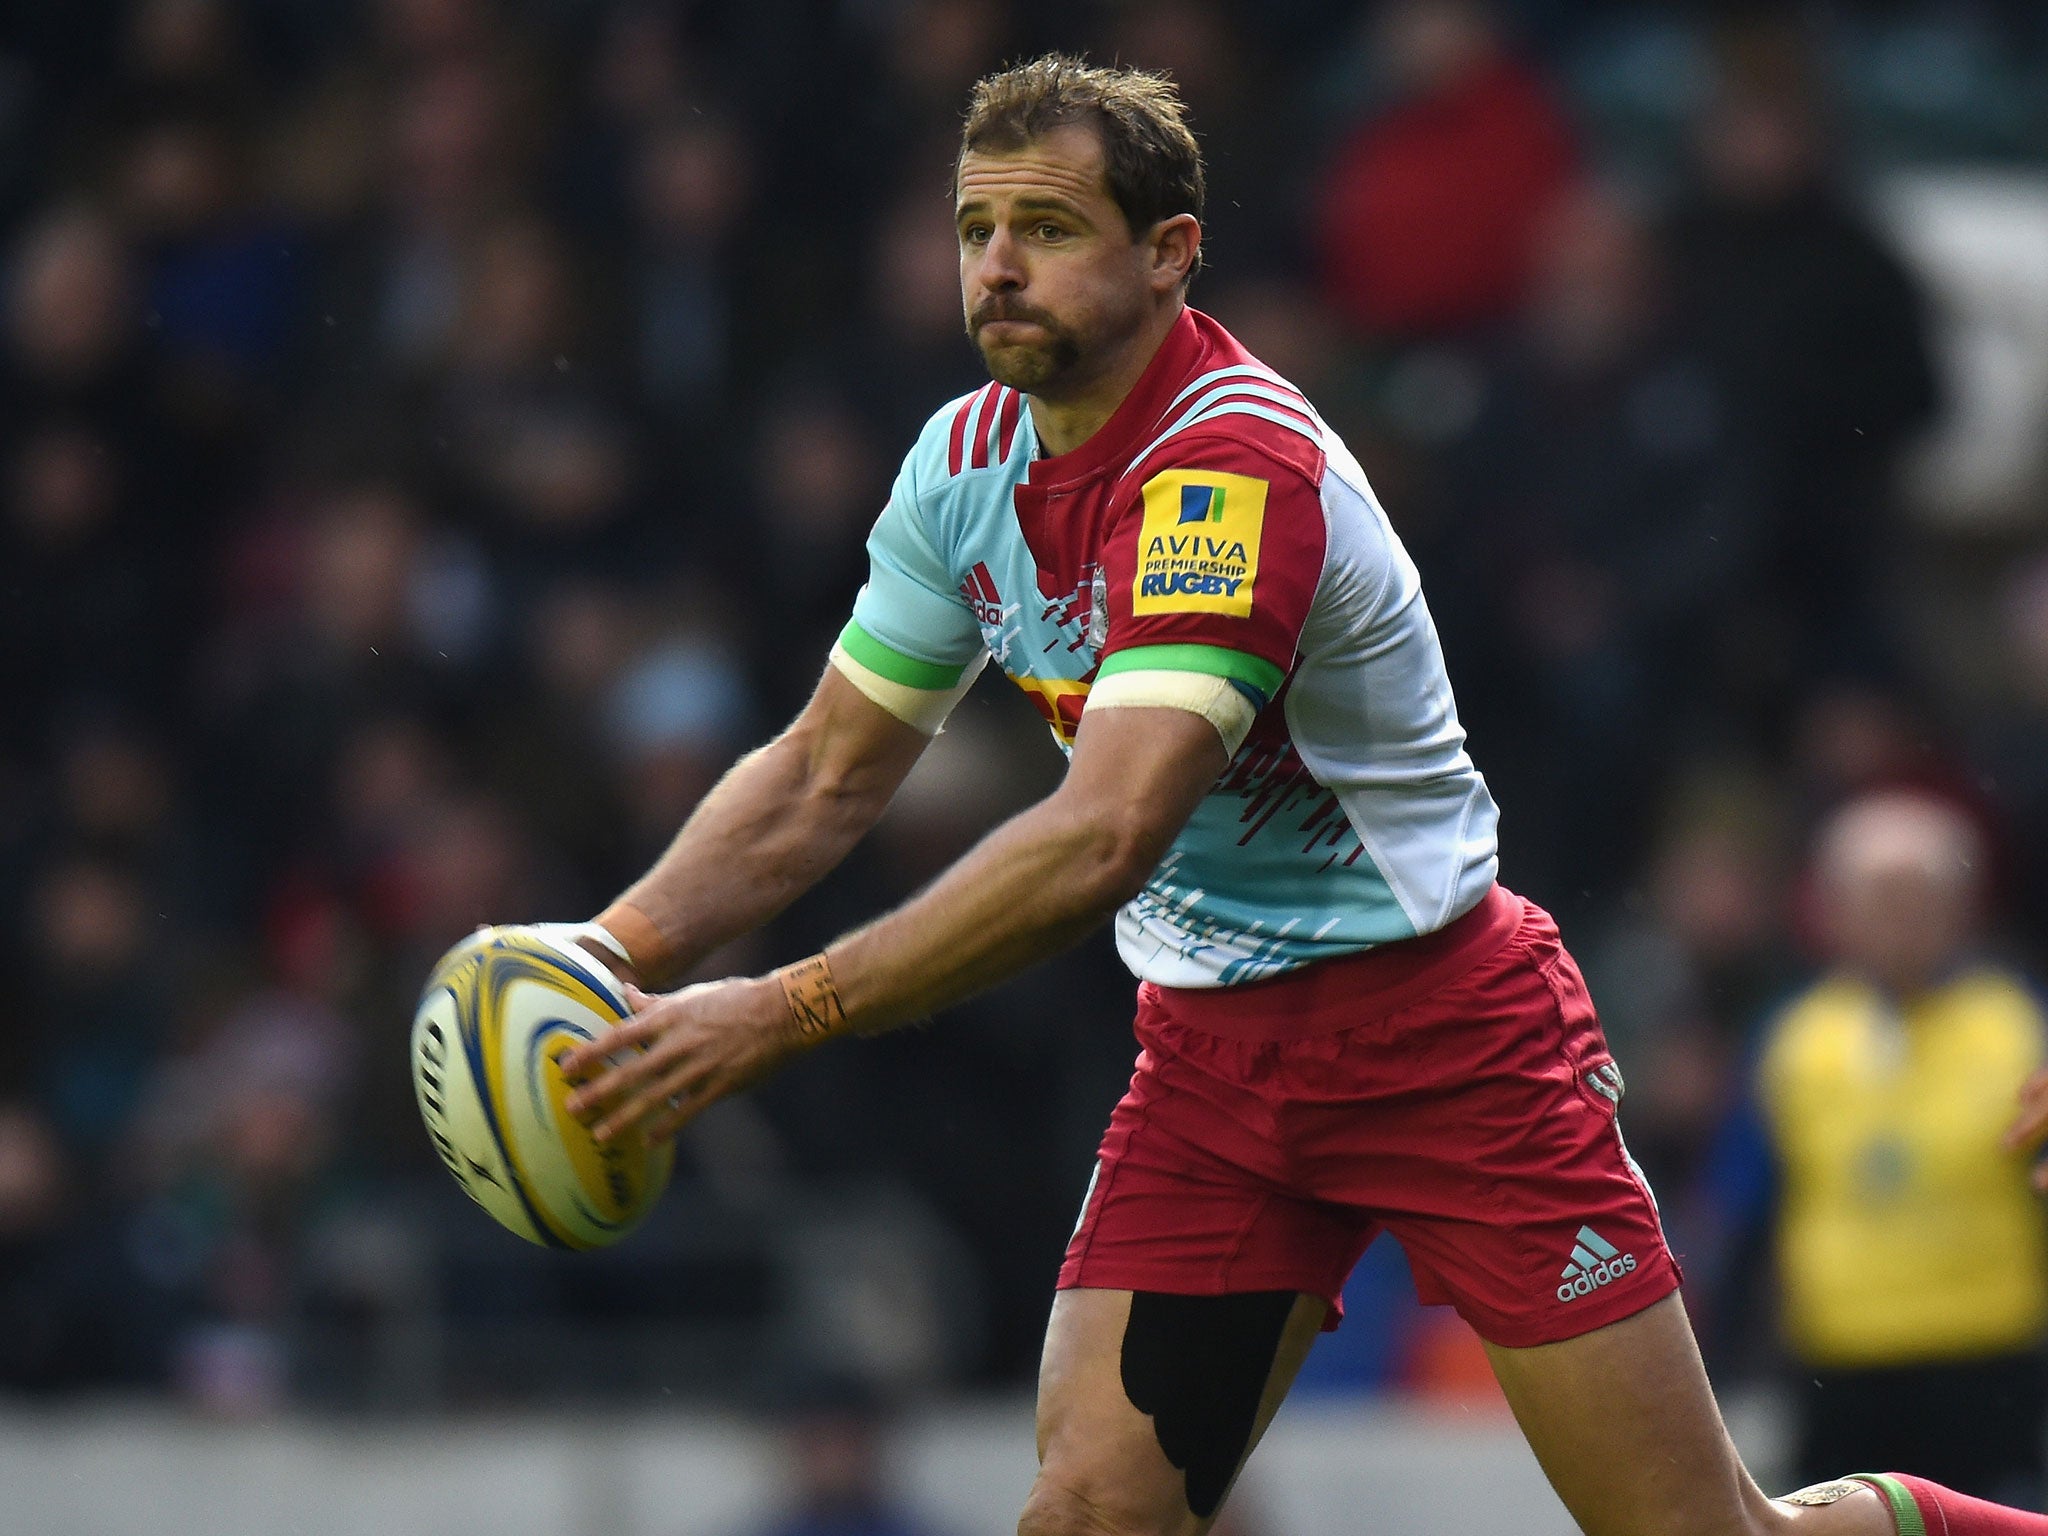 Nick Evans will retire from rugby union at the end of the 2016/17 season